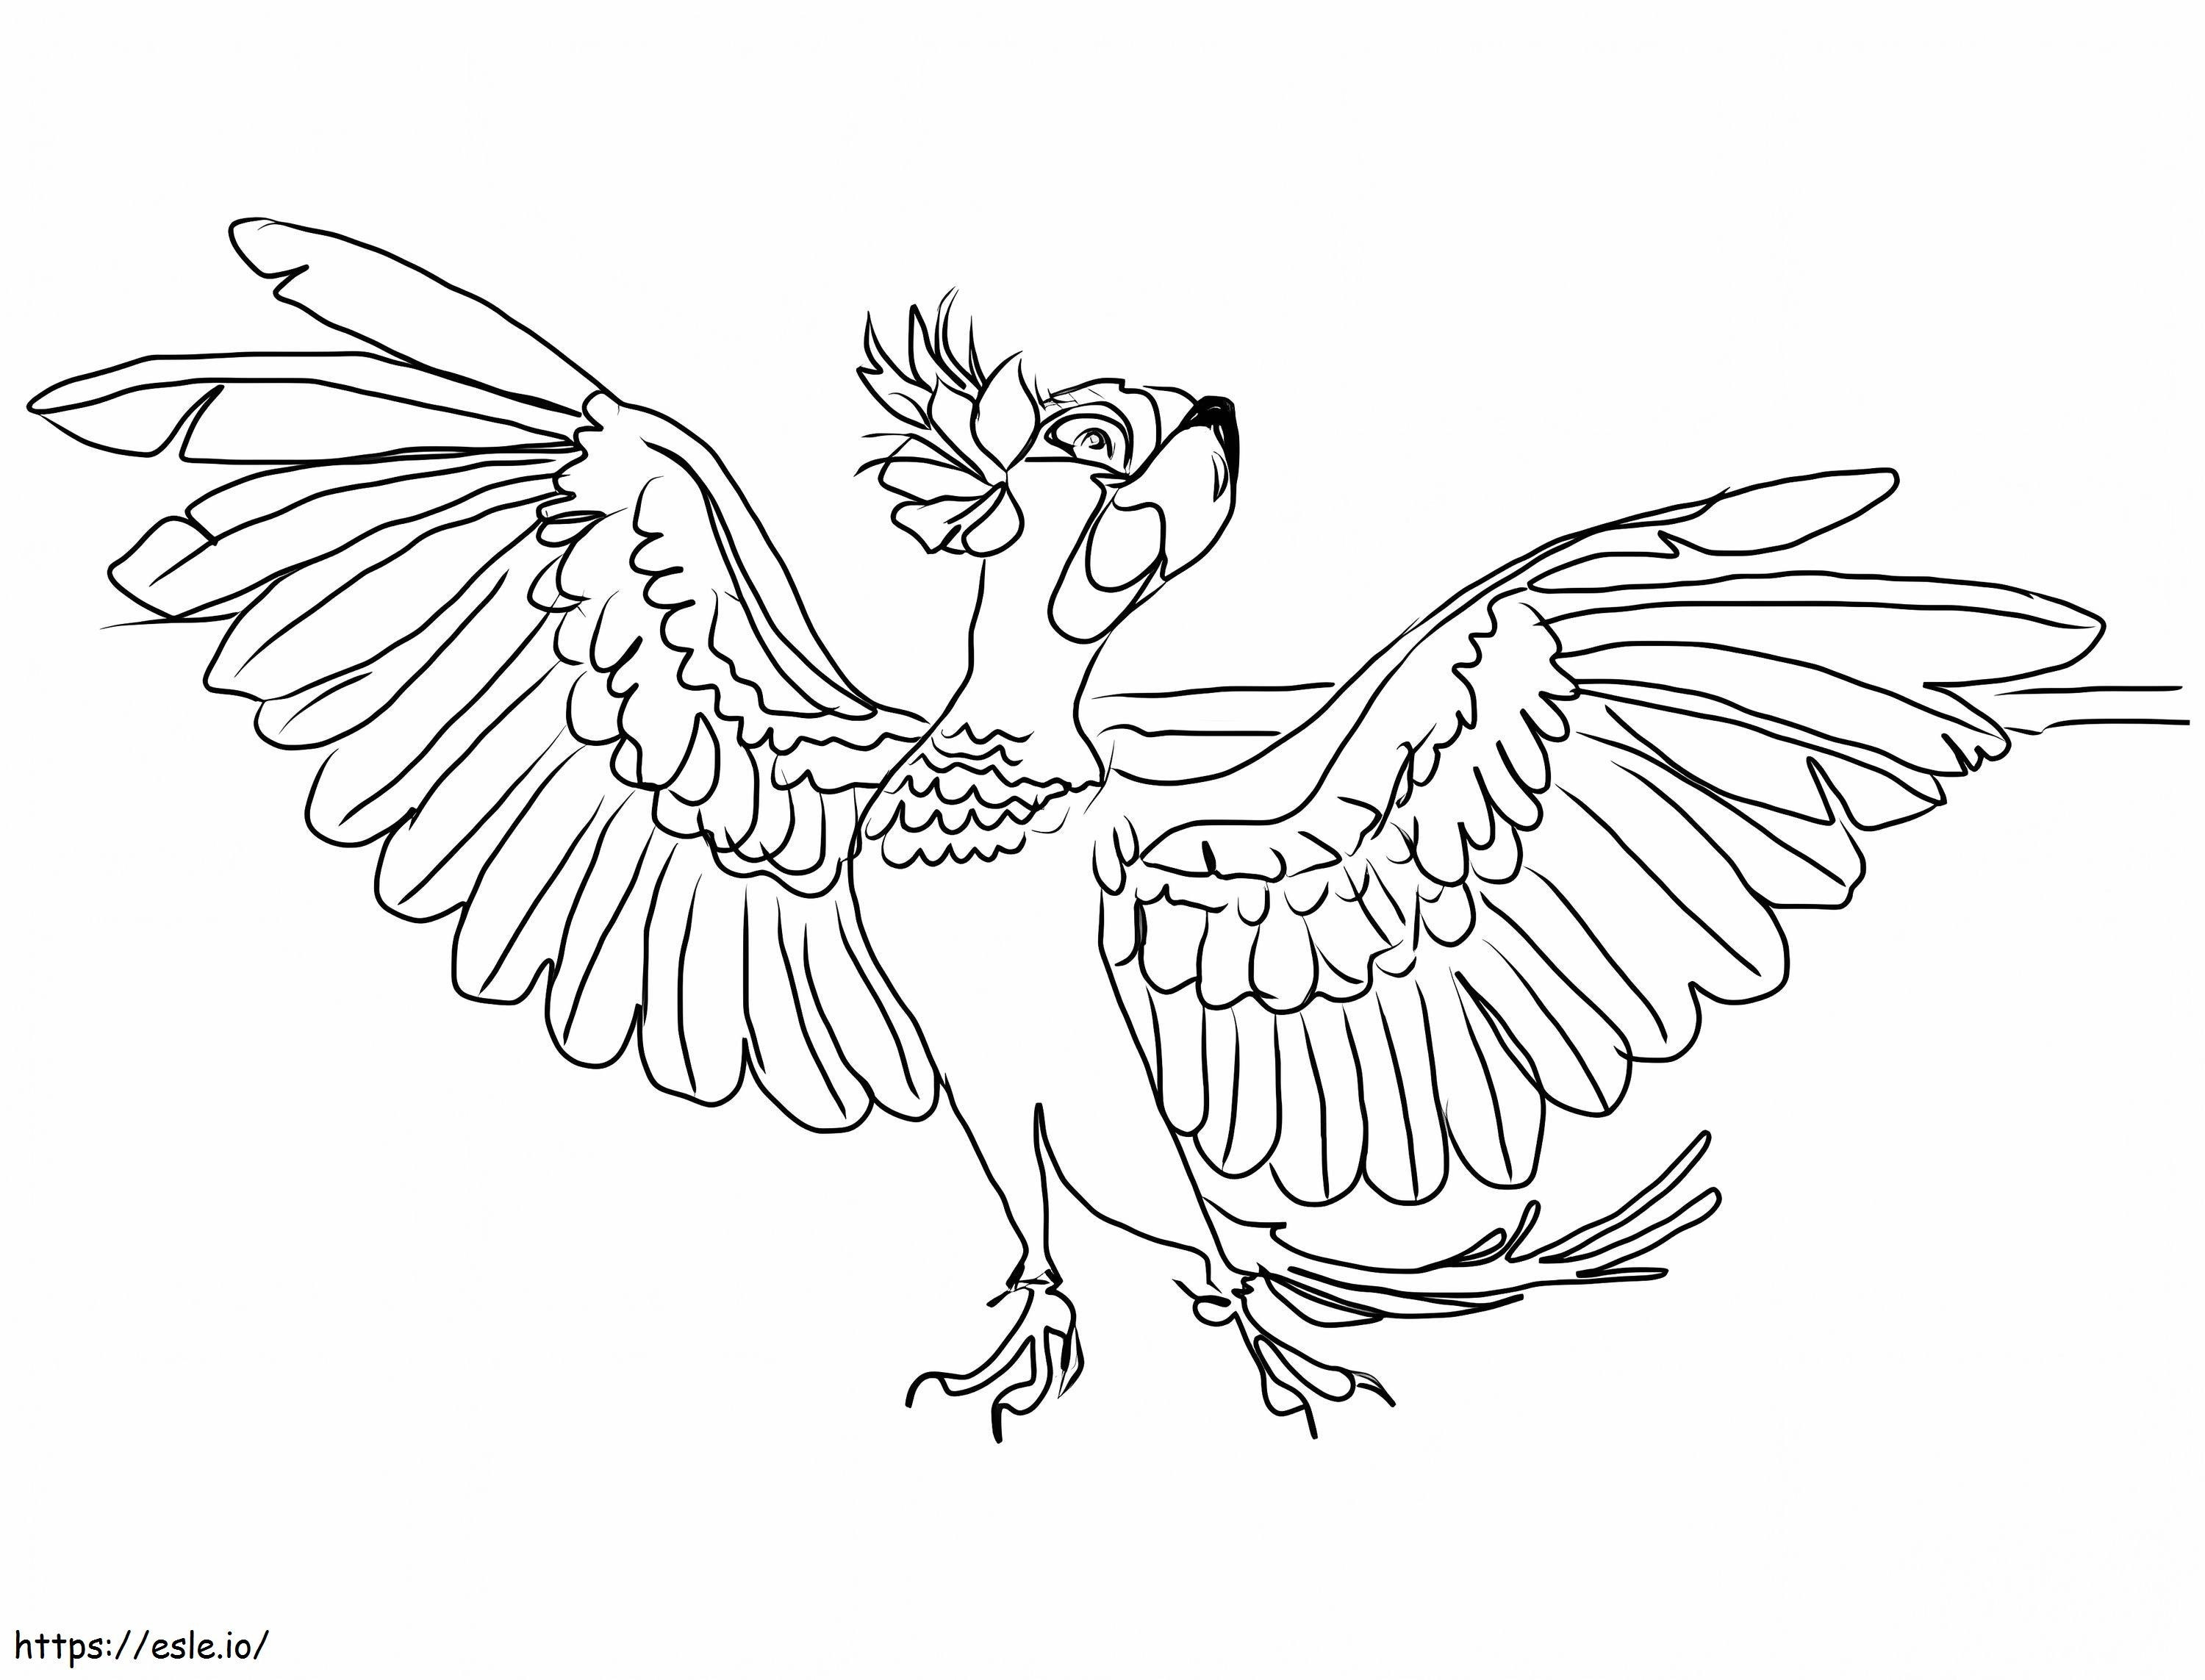 Jewel With Spread Wings coloring page